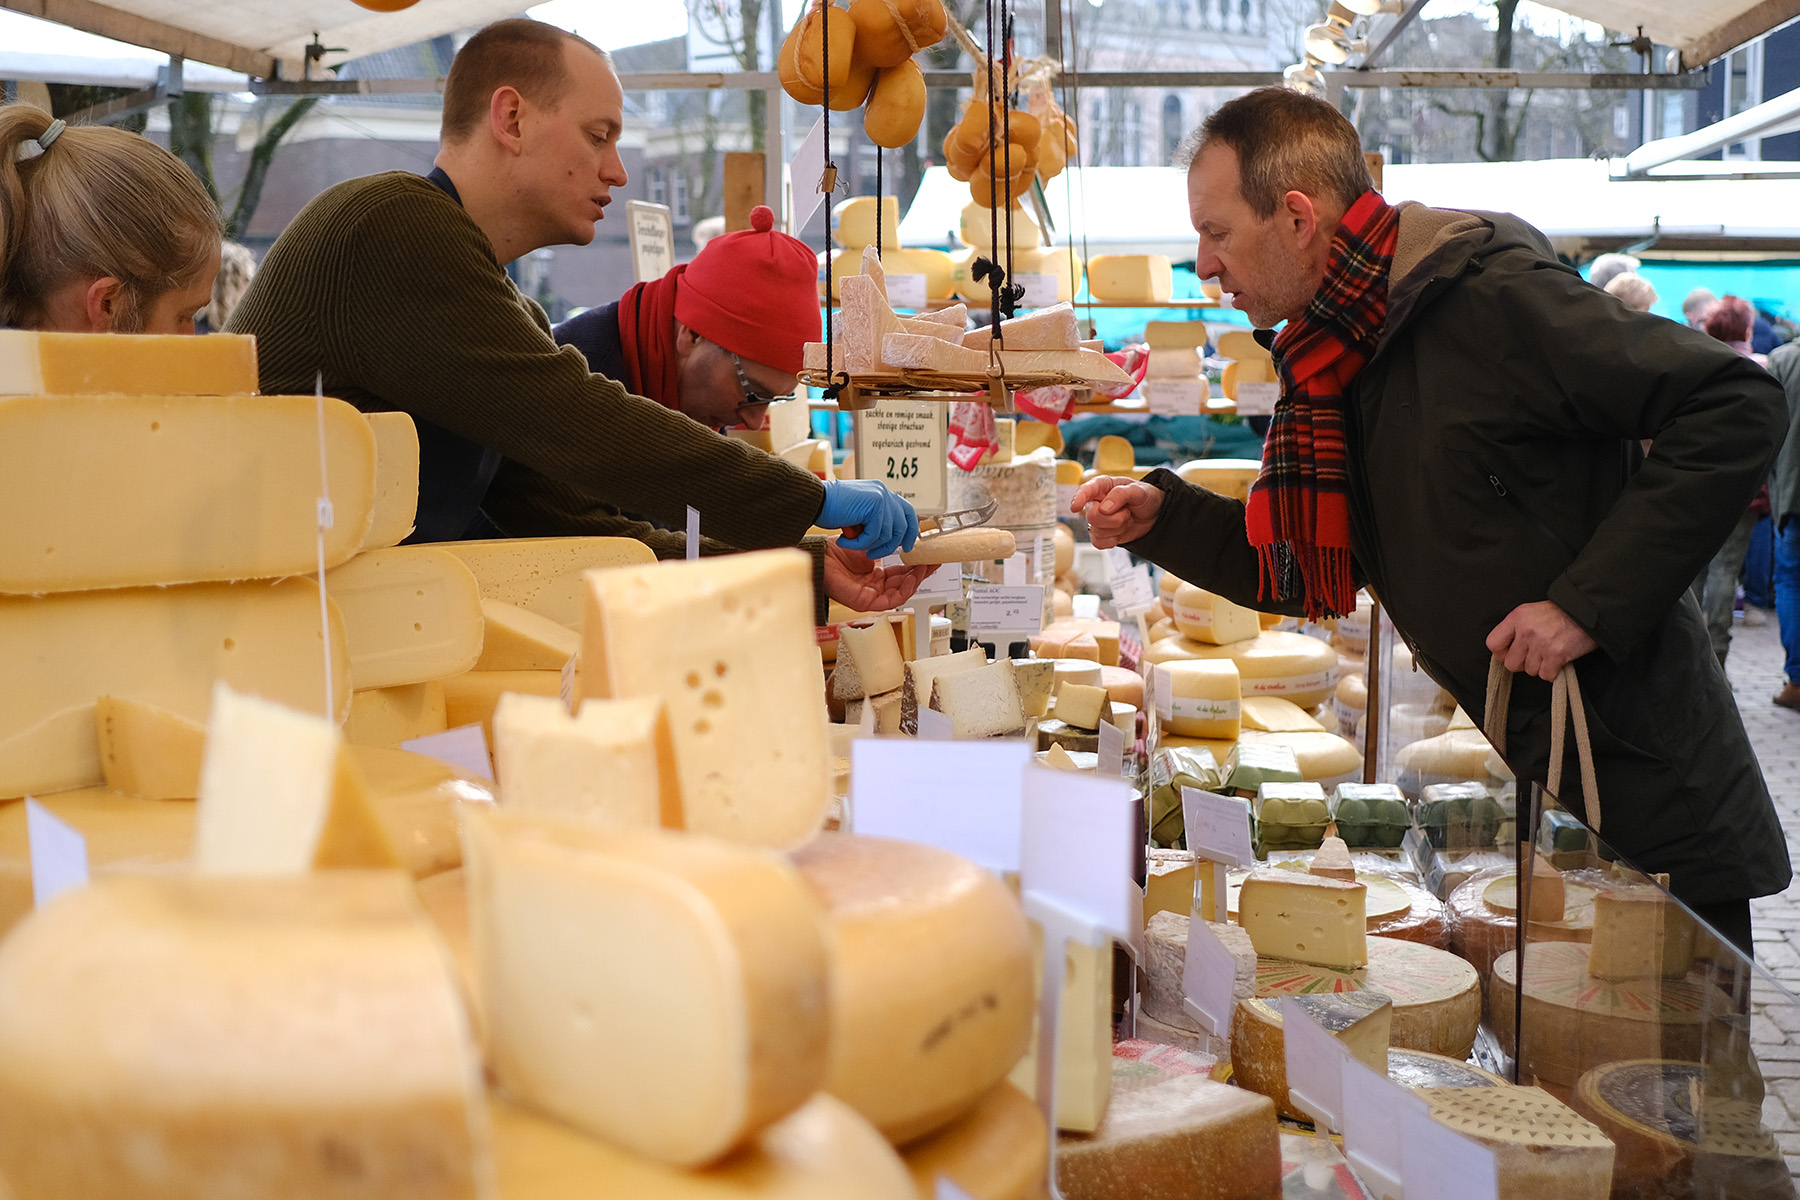 A man looks at a cheese before tasting at an organic farmers market near Northern Church (Noorderkerk) in Amsterdam, Netherlands.